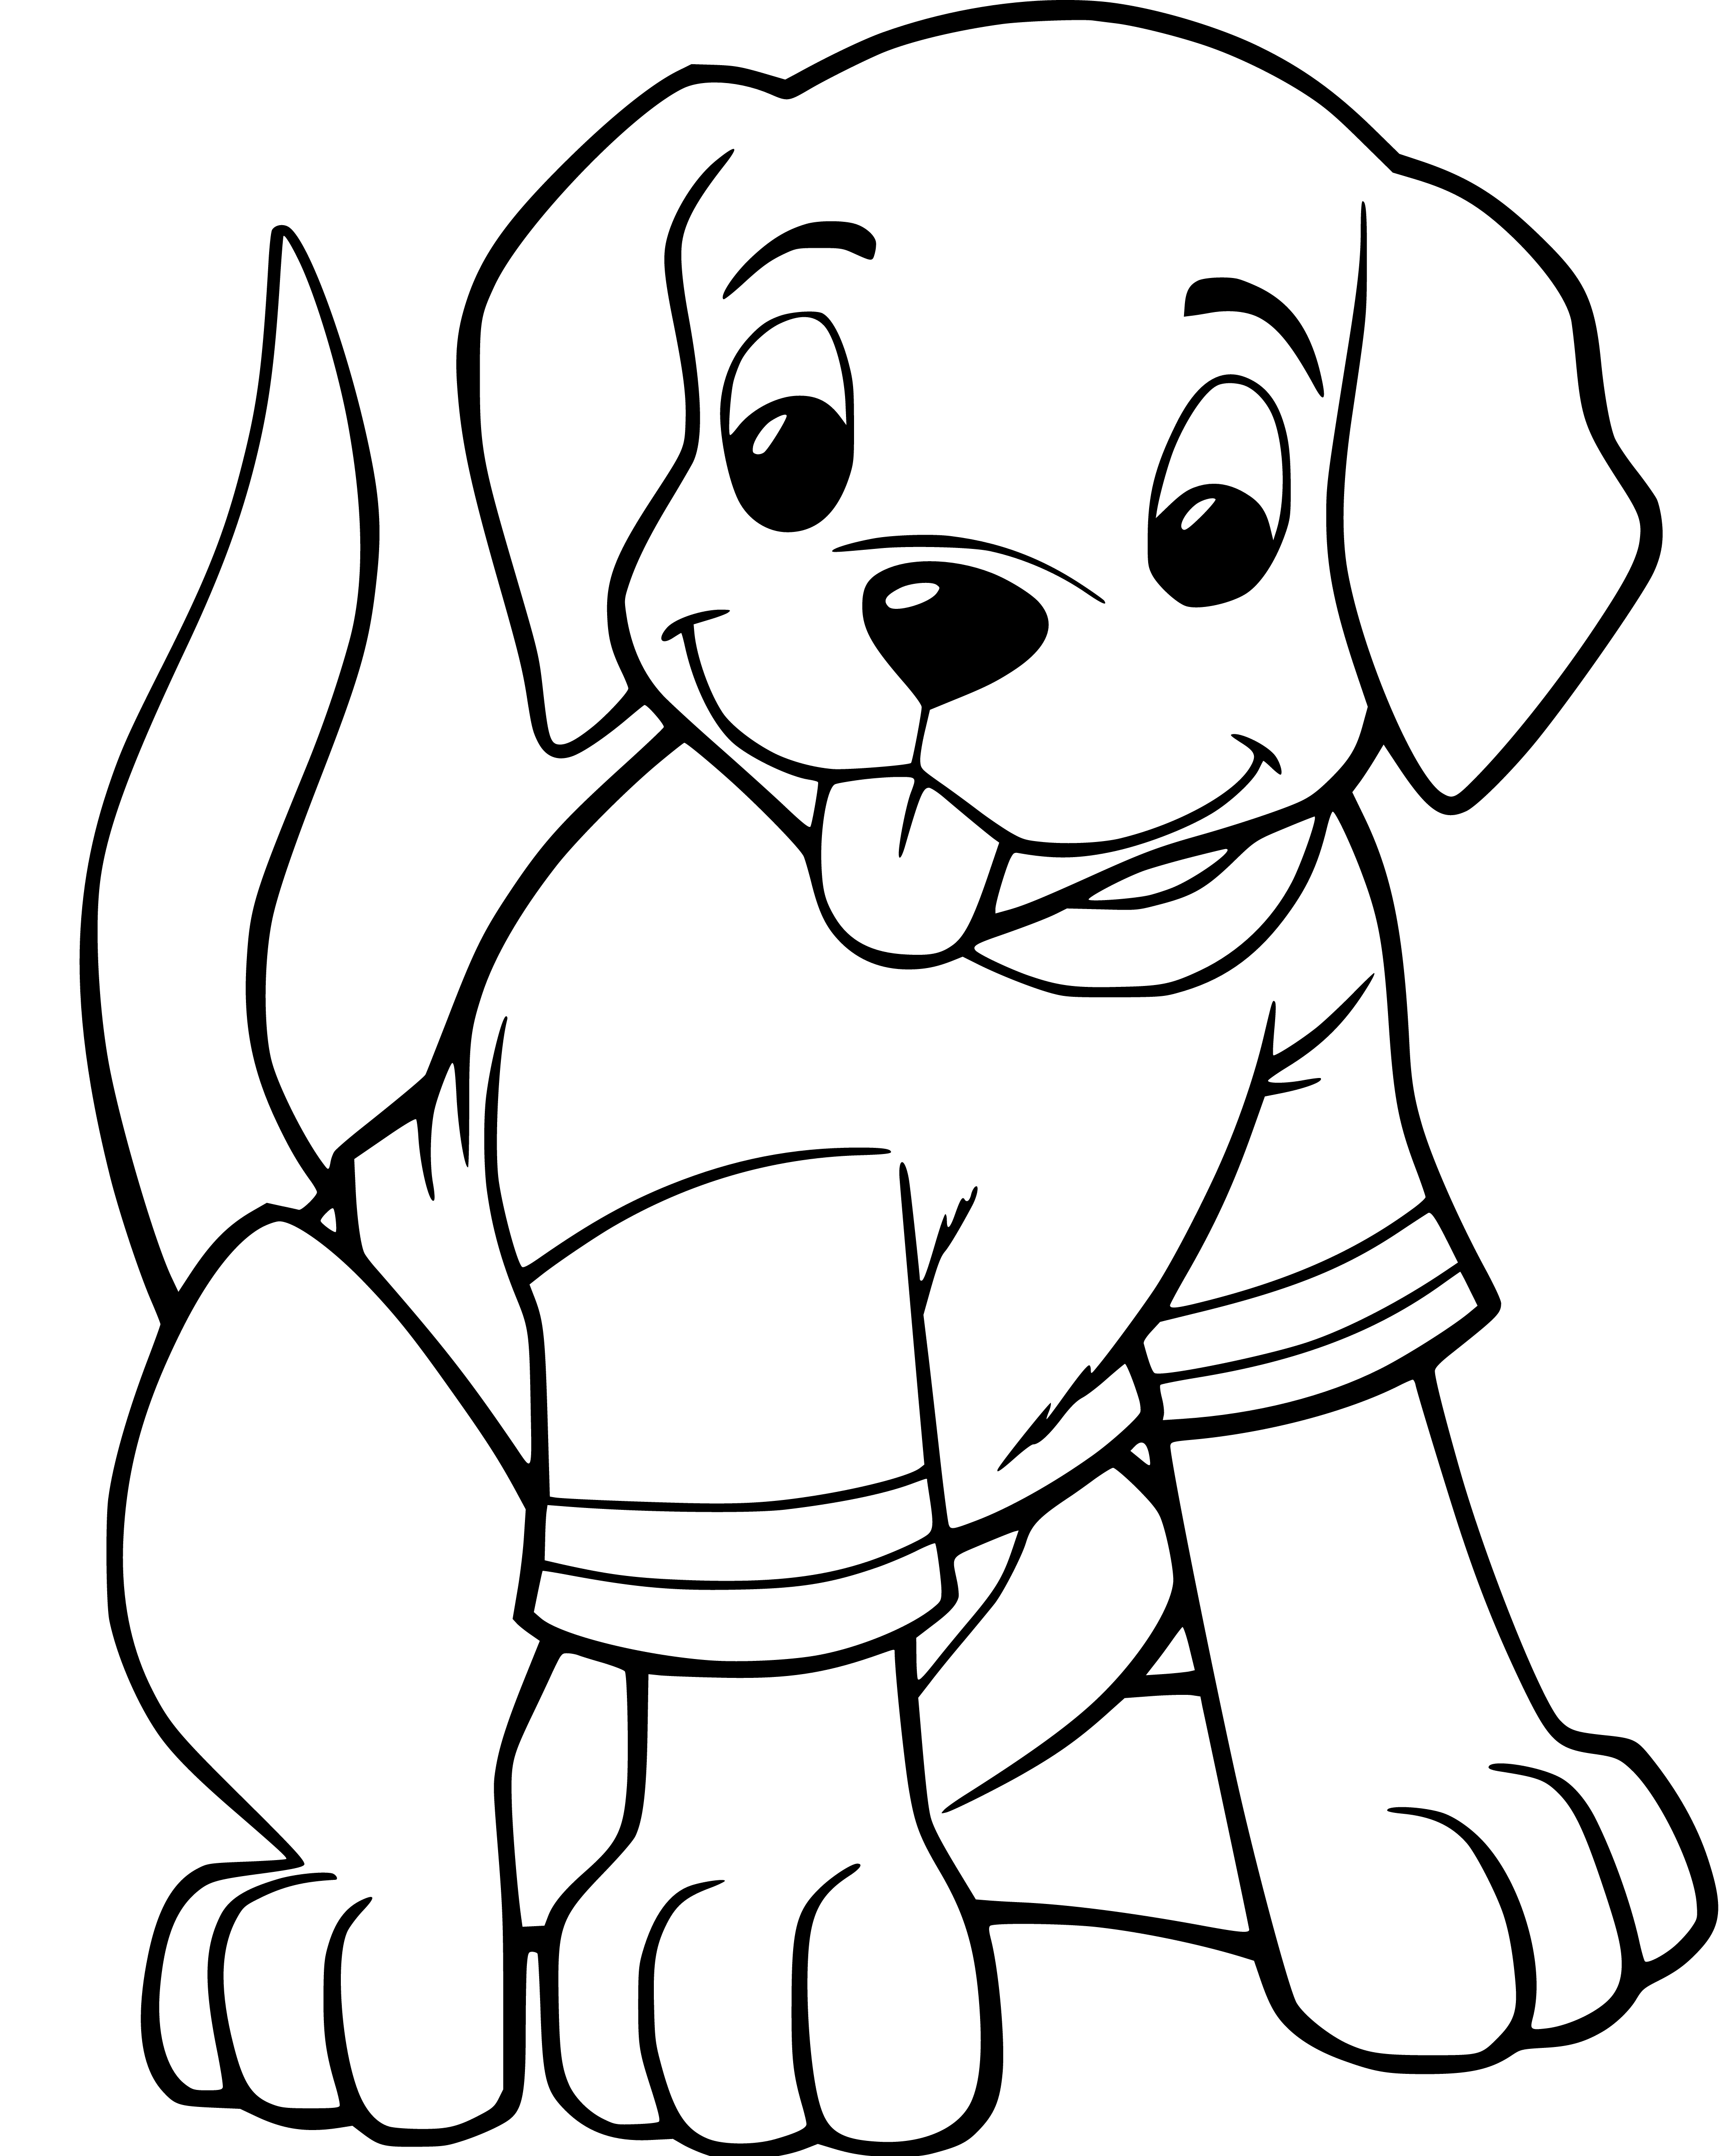 Puppy wearing clothes Coloring pages - SheetalColor.com